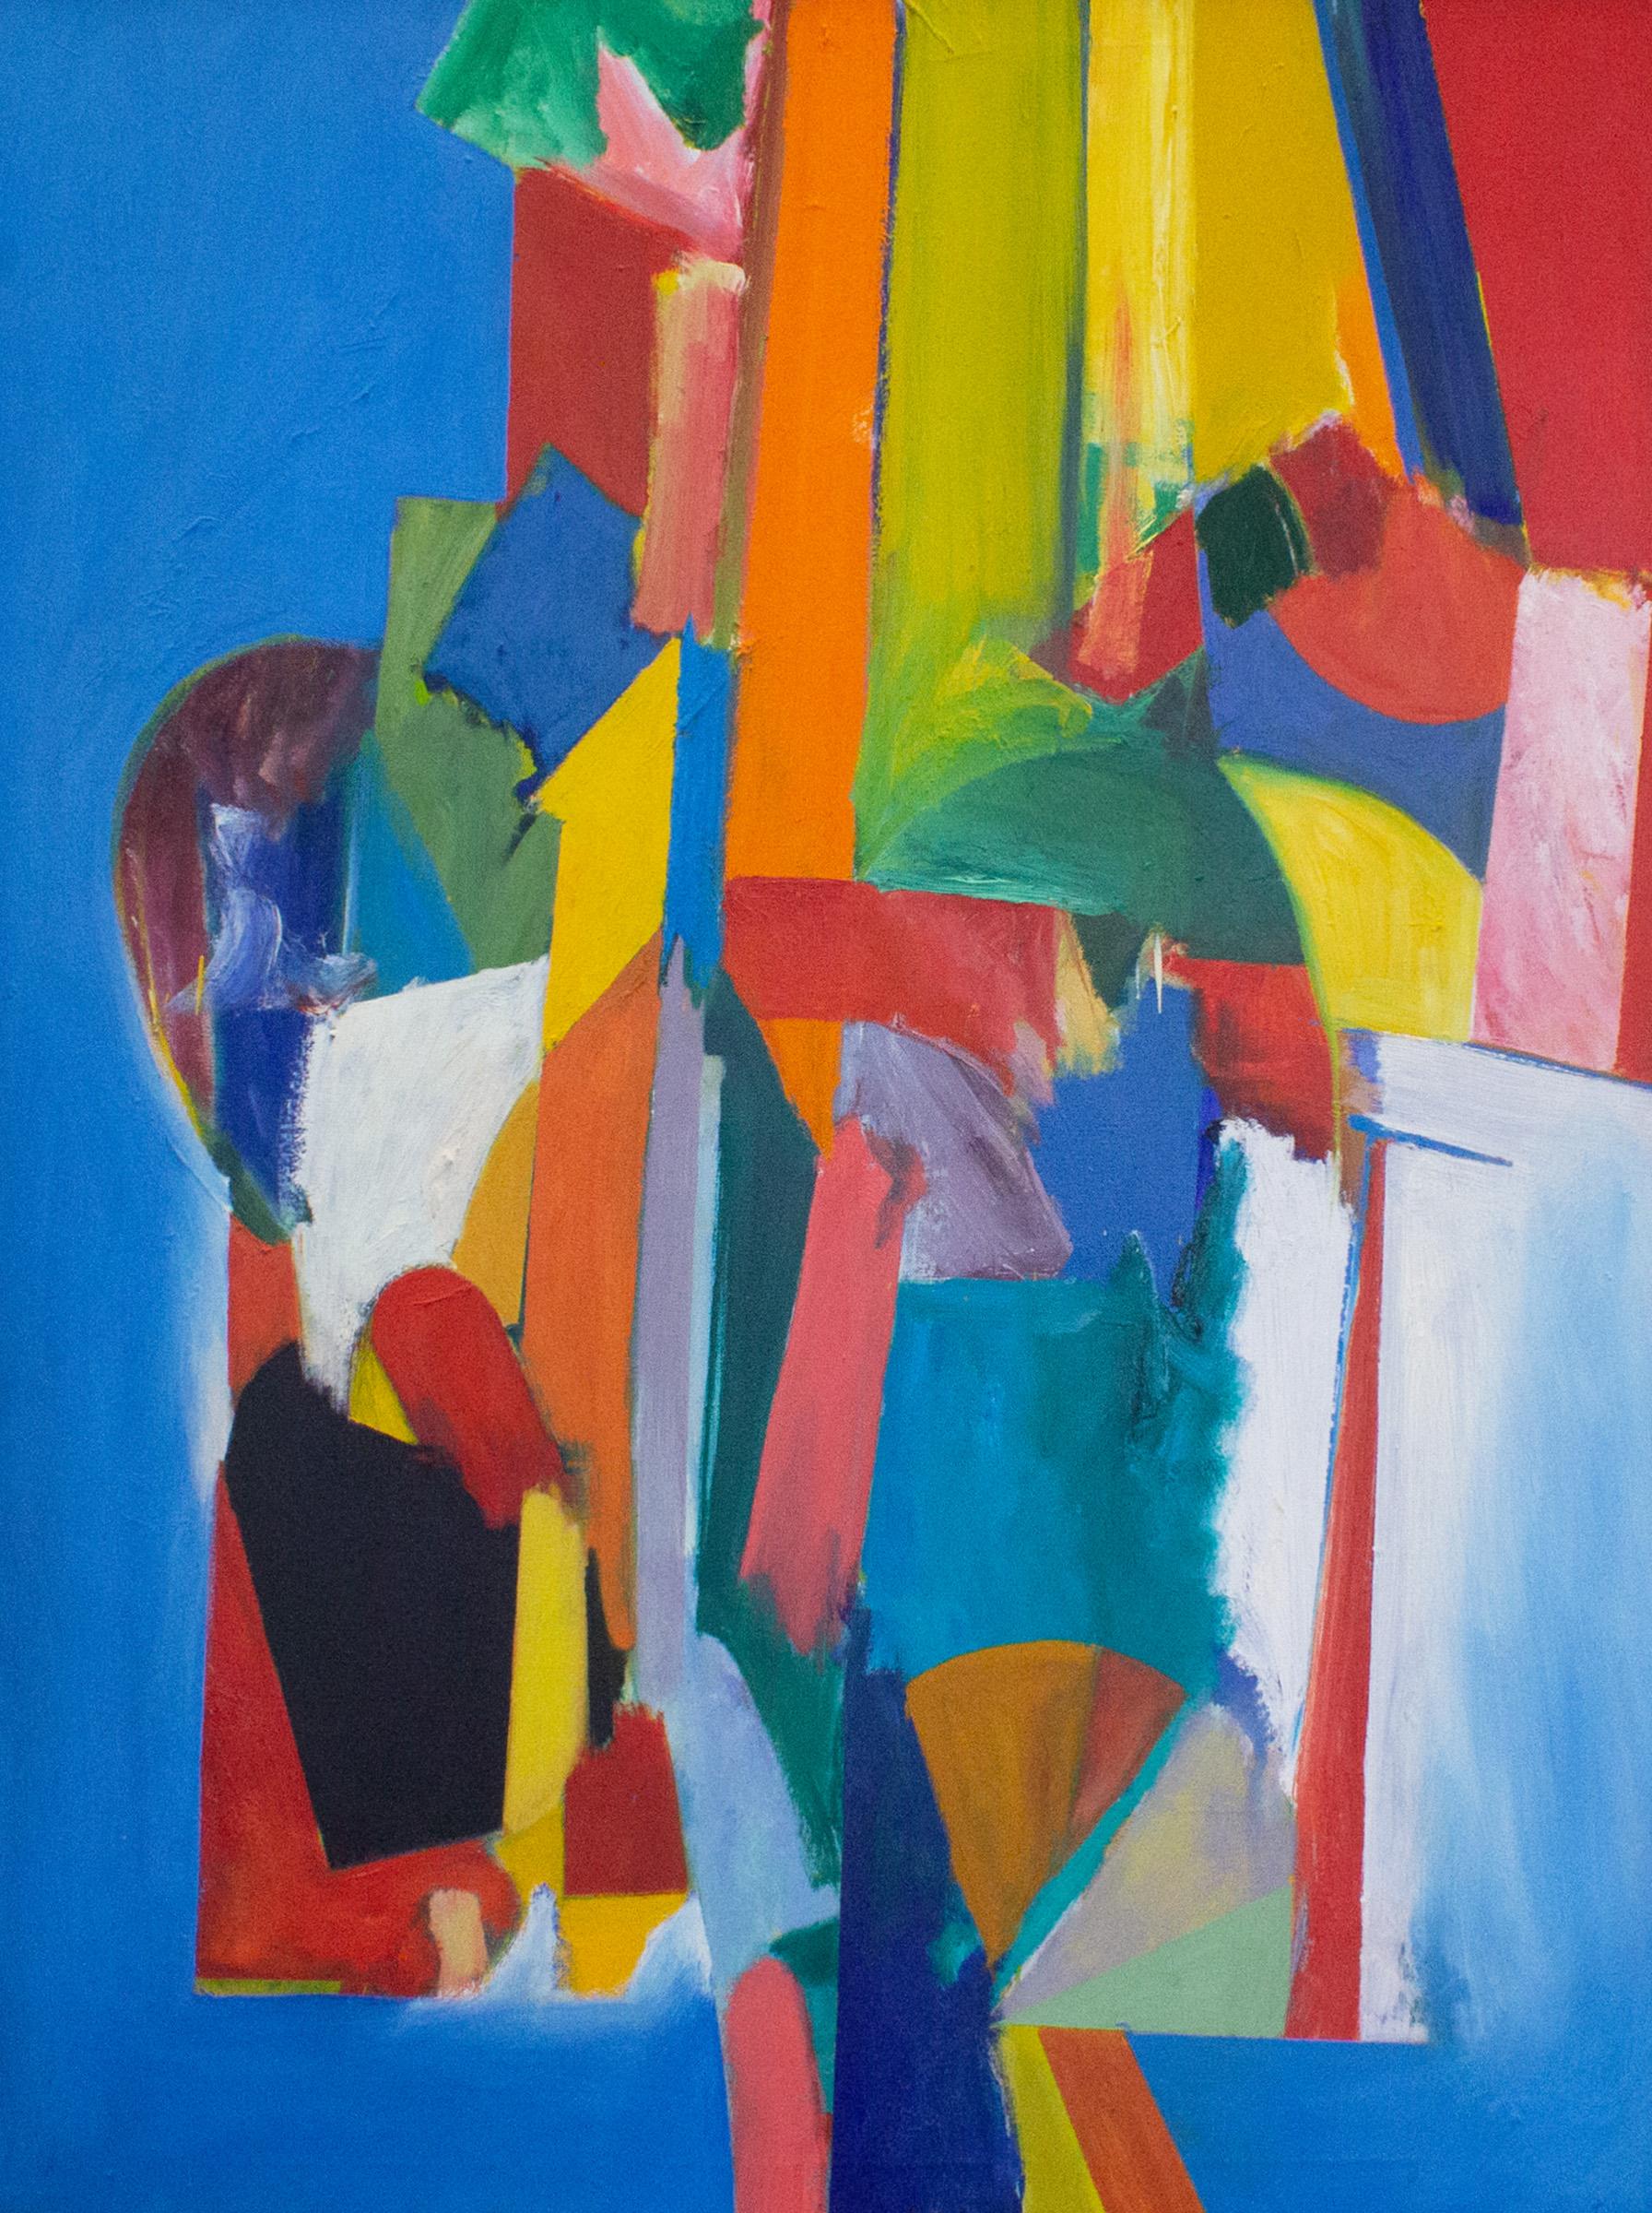 An abstract acrylic on canvas painting by American artist Morris Barazani (1924-2015). Predominately painted in primary colors, this painting depicts bold geometric shapes that appear to project from the canvas. Wide bands of brushwork overlap and